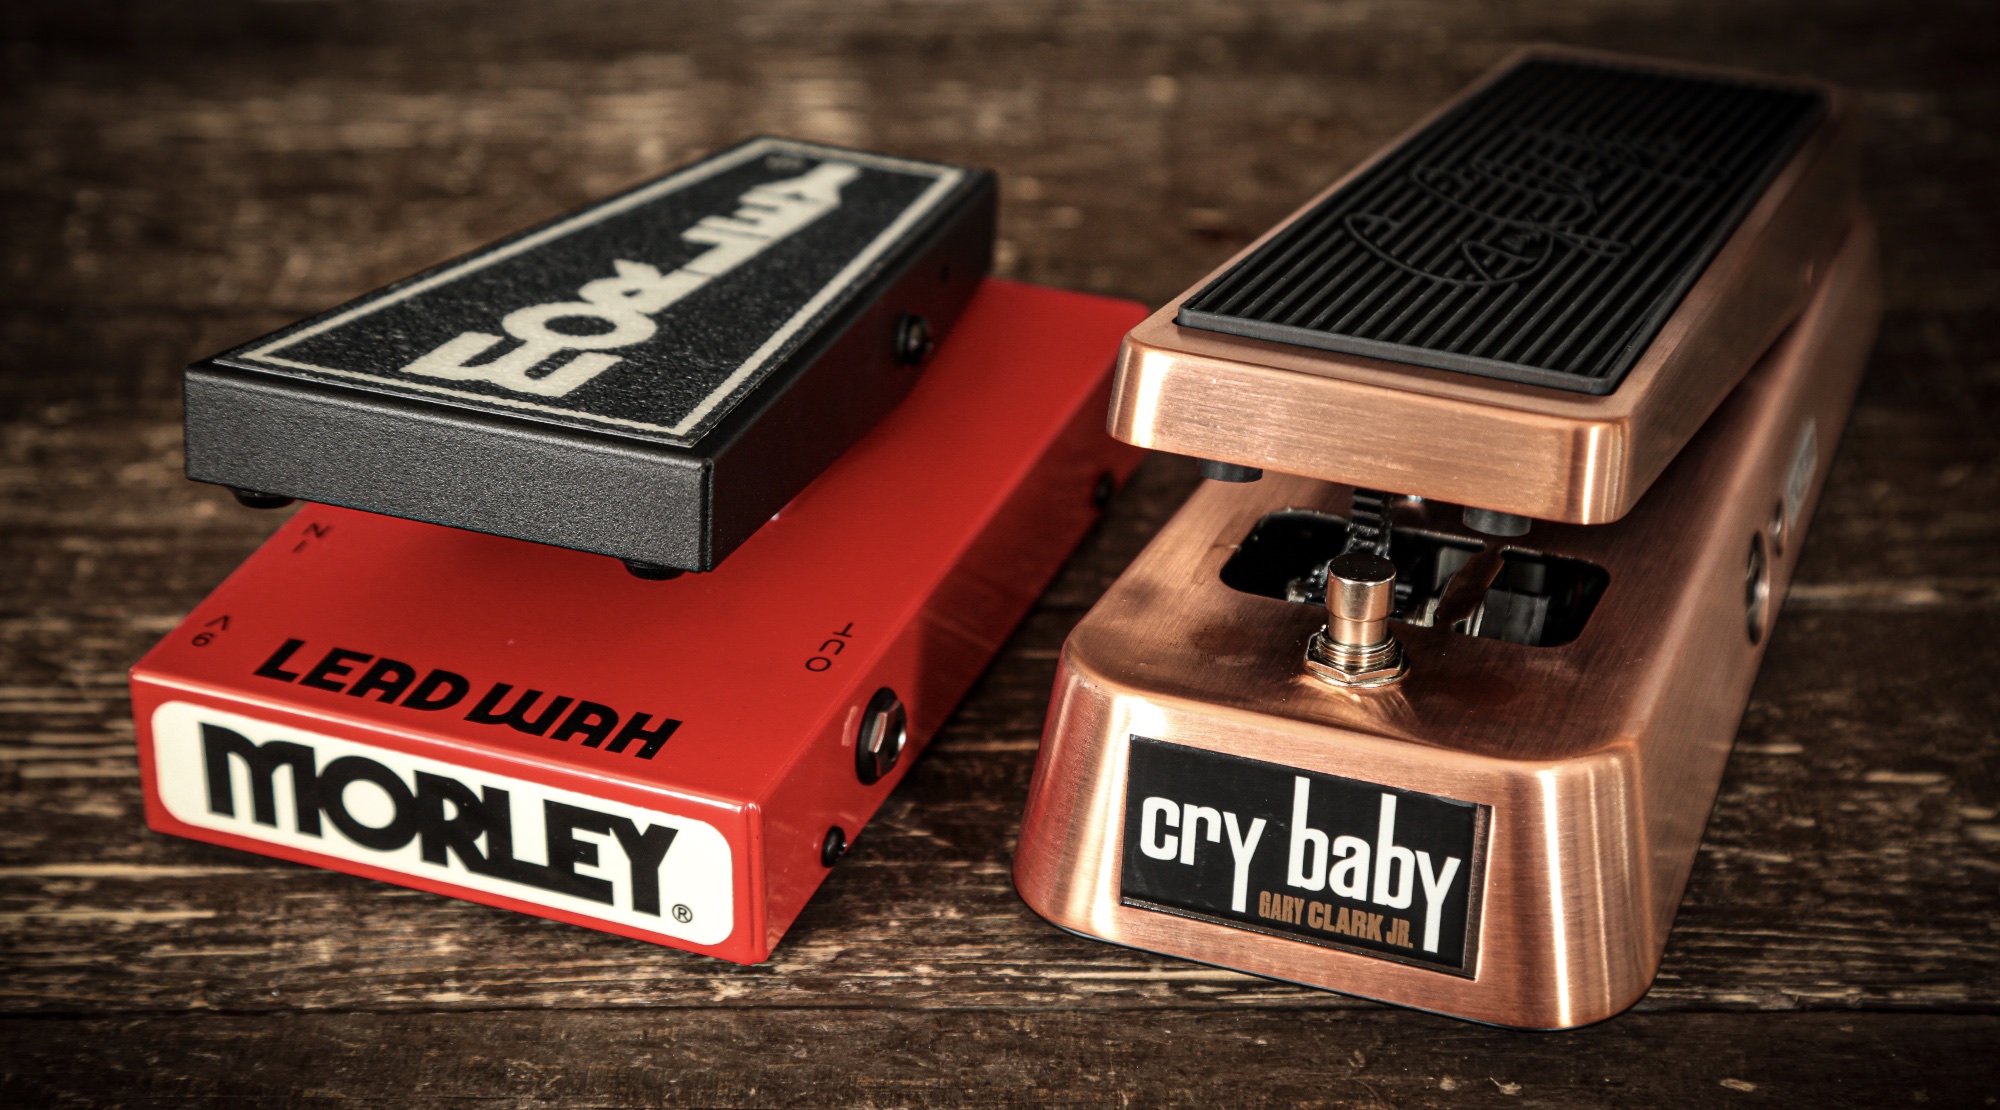 Dunlop vs. Morley - Which Wah Pedals Are Better? - Andertons Blog